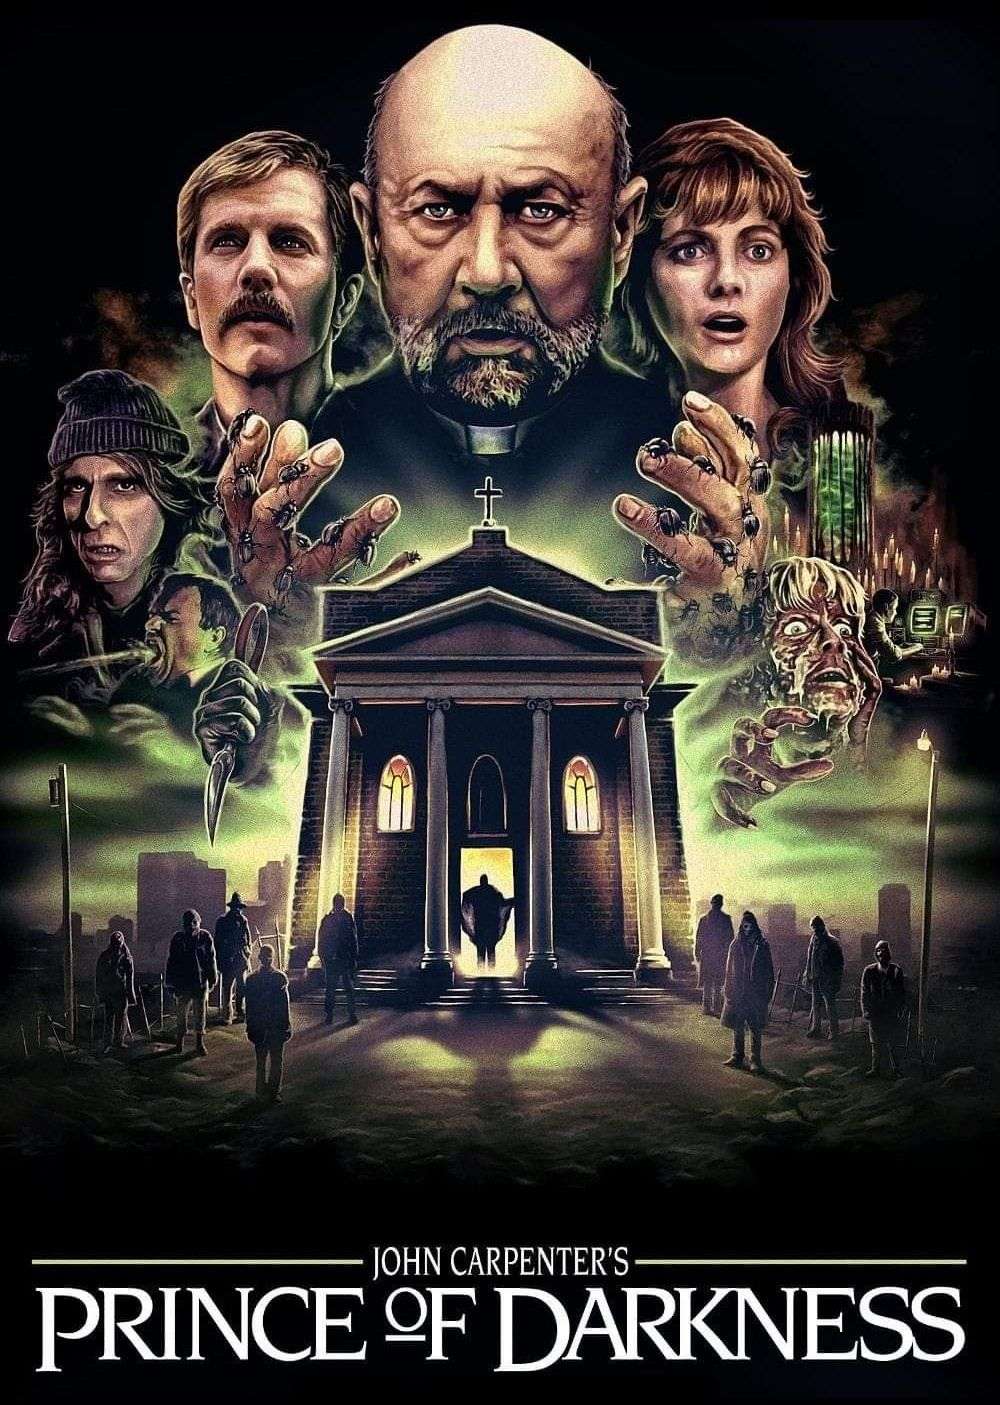 Prince of Darkness (1987)